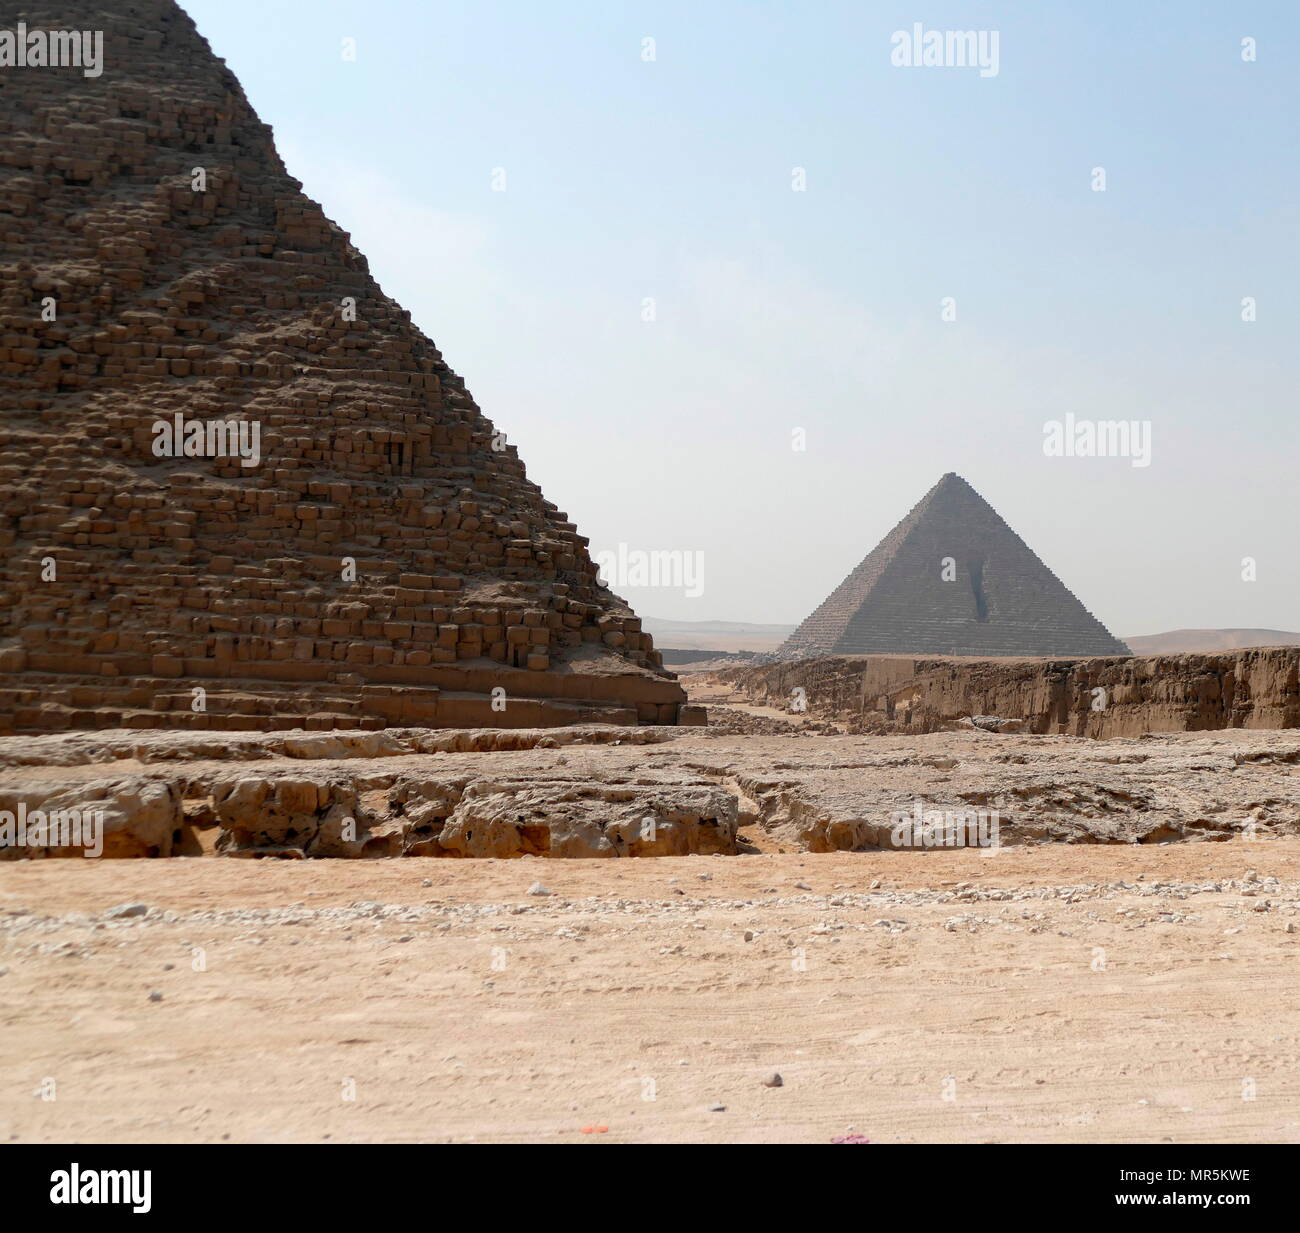 Top 95+ Images why is the pyramid of menkaure the smallest out of the three pyramids? Updated